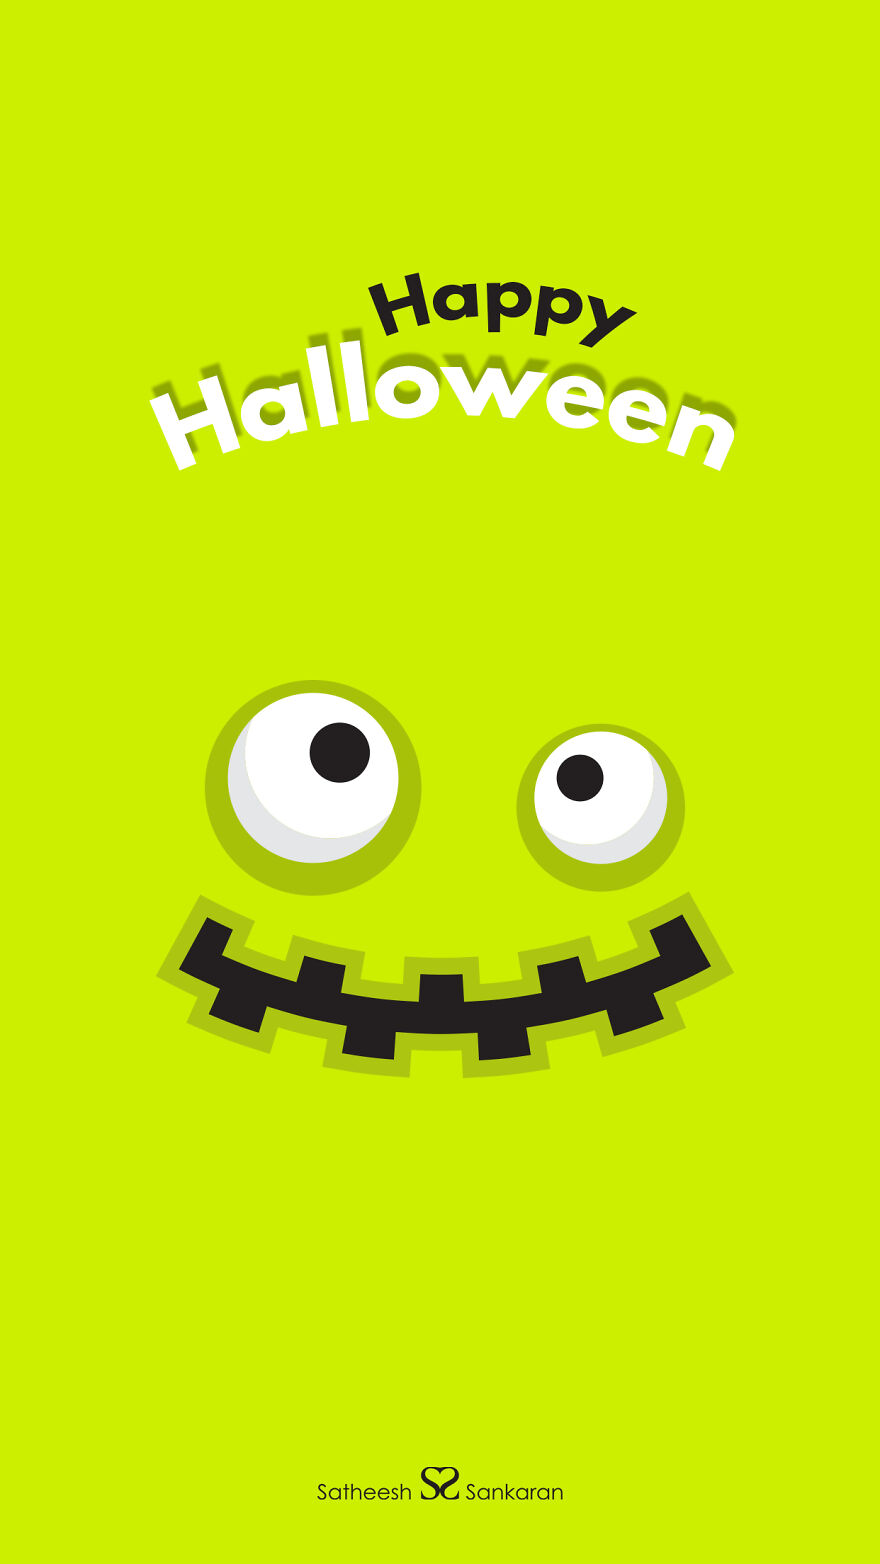 A Colorful Cute List Of Monster Themed Wallpapers For Halloween